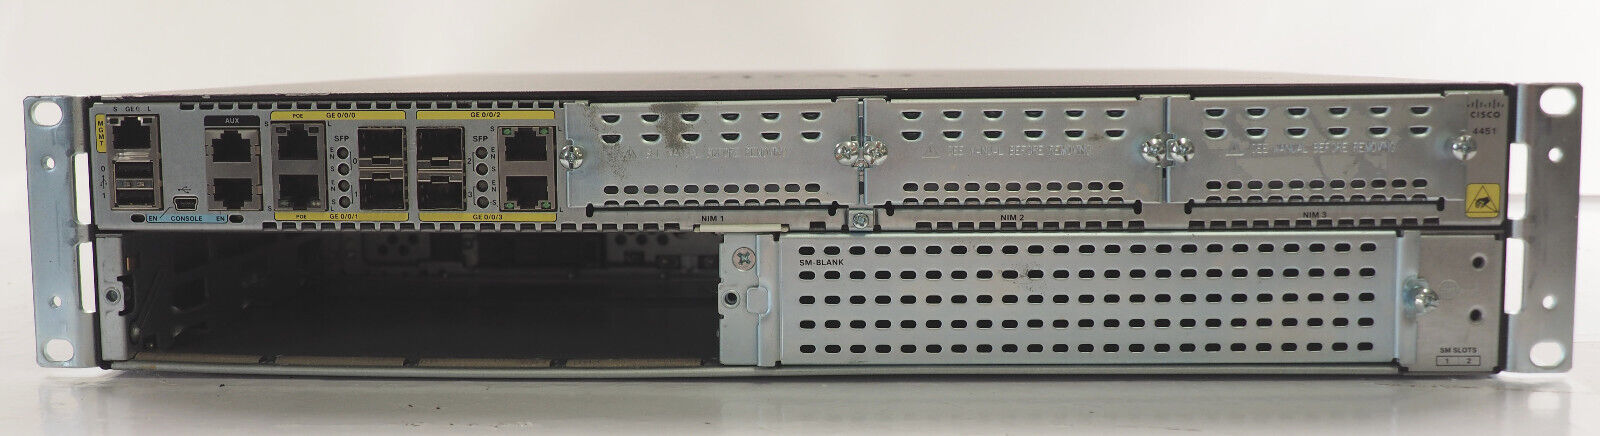 Cisco ISR4451-X/K9 V07 Integrated Services Router w/ 1 x 450W PSU NO Front Panel